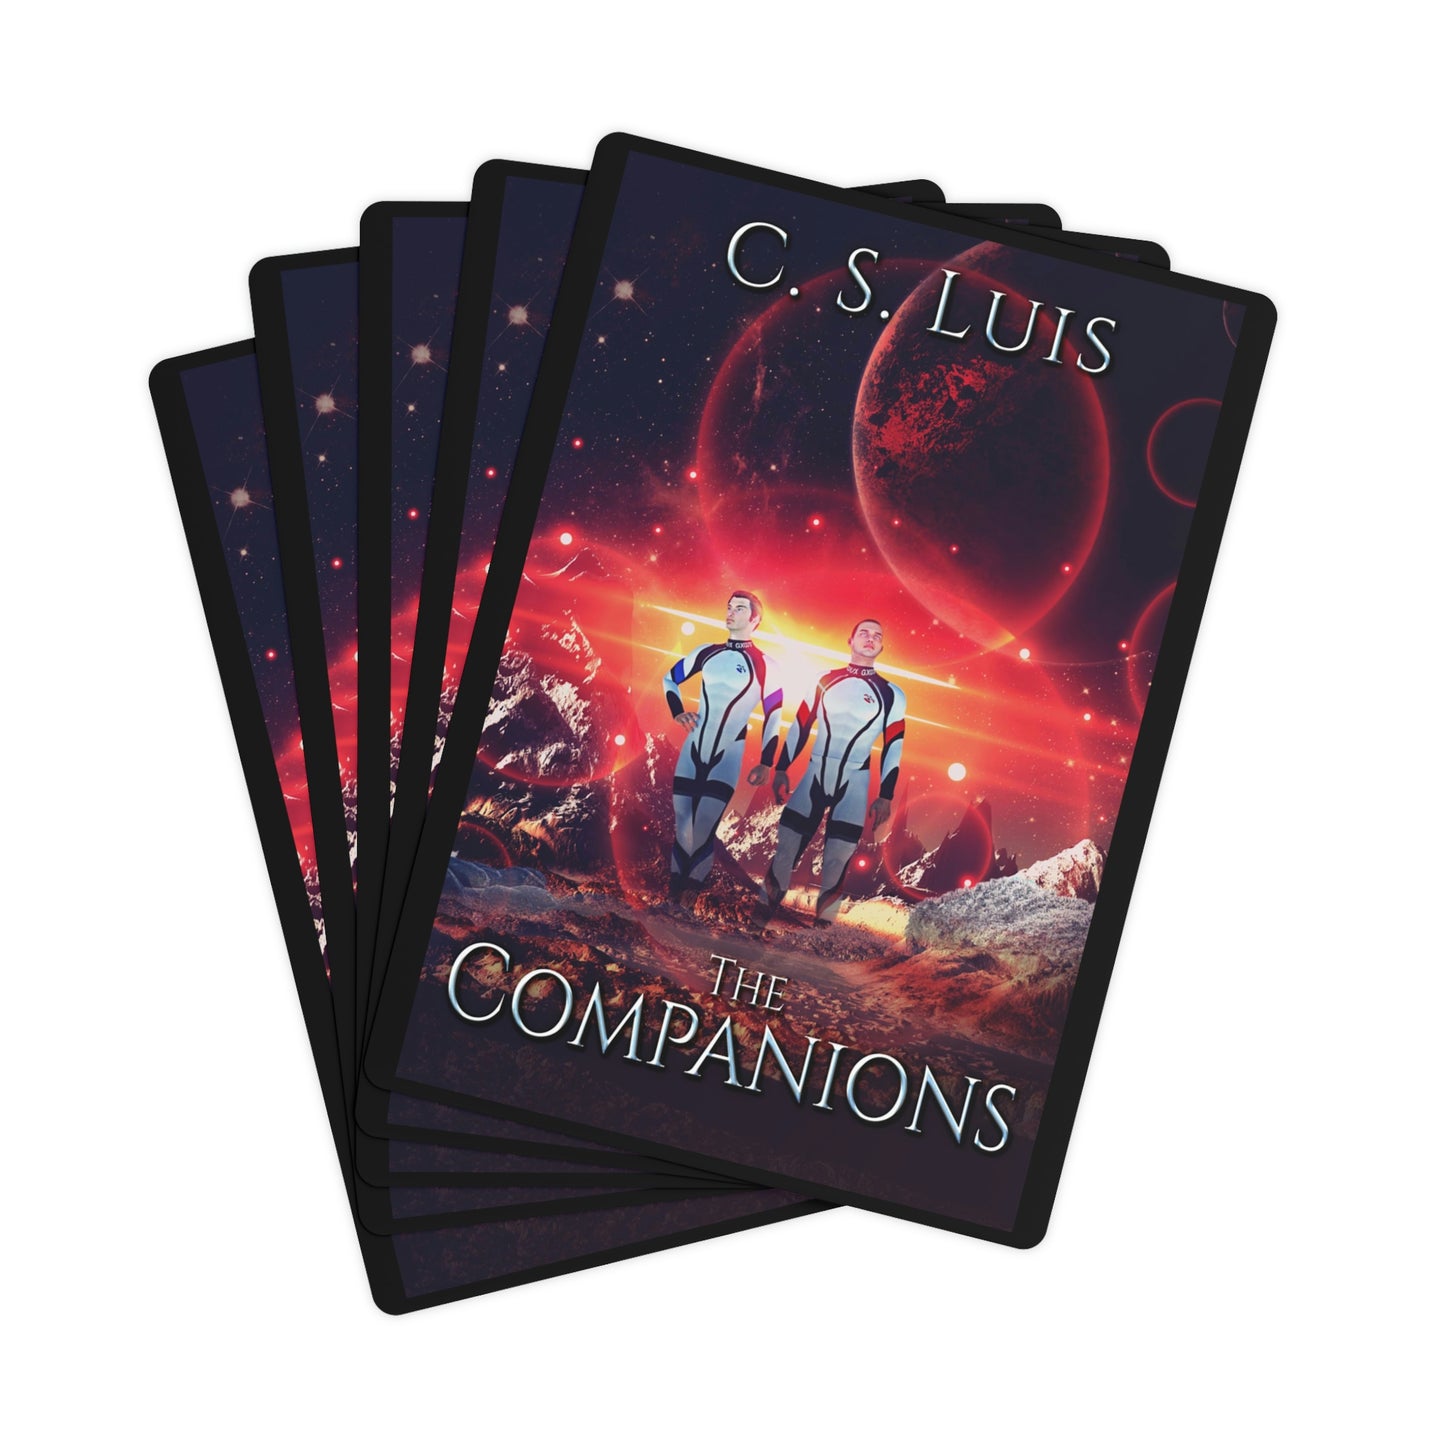 The Companions - Playing Cards